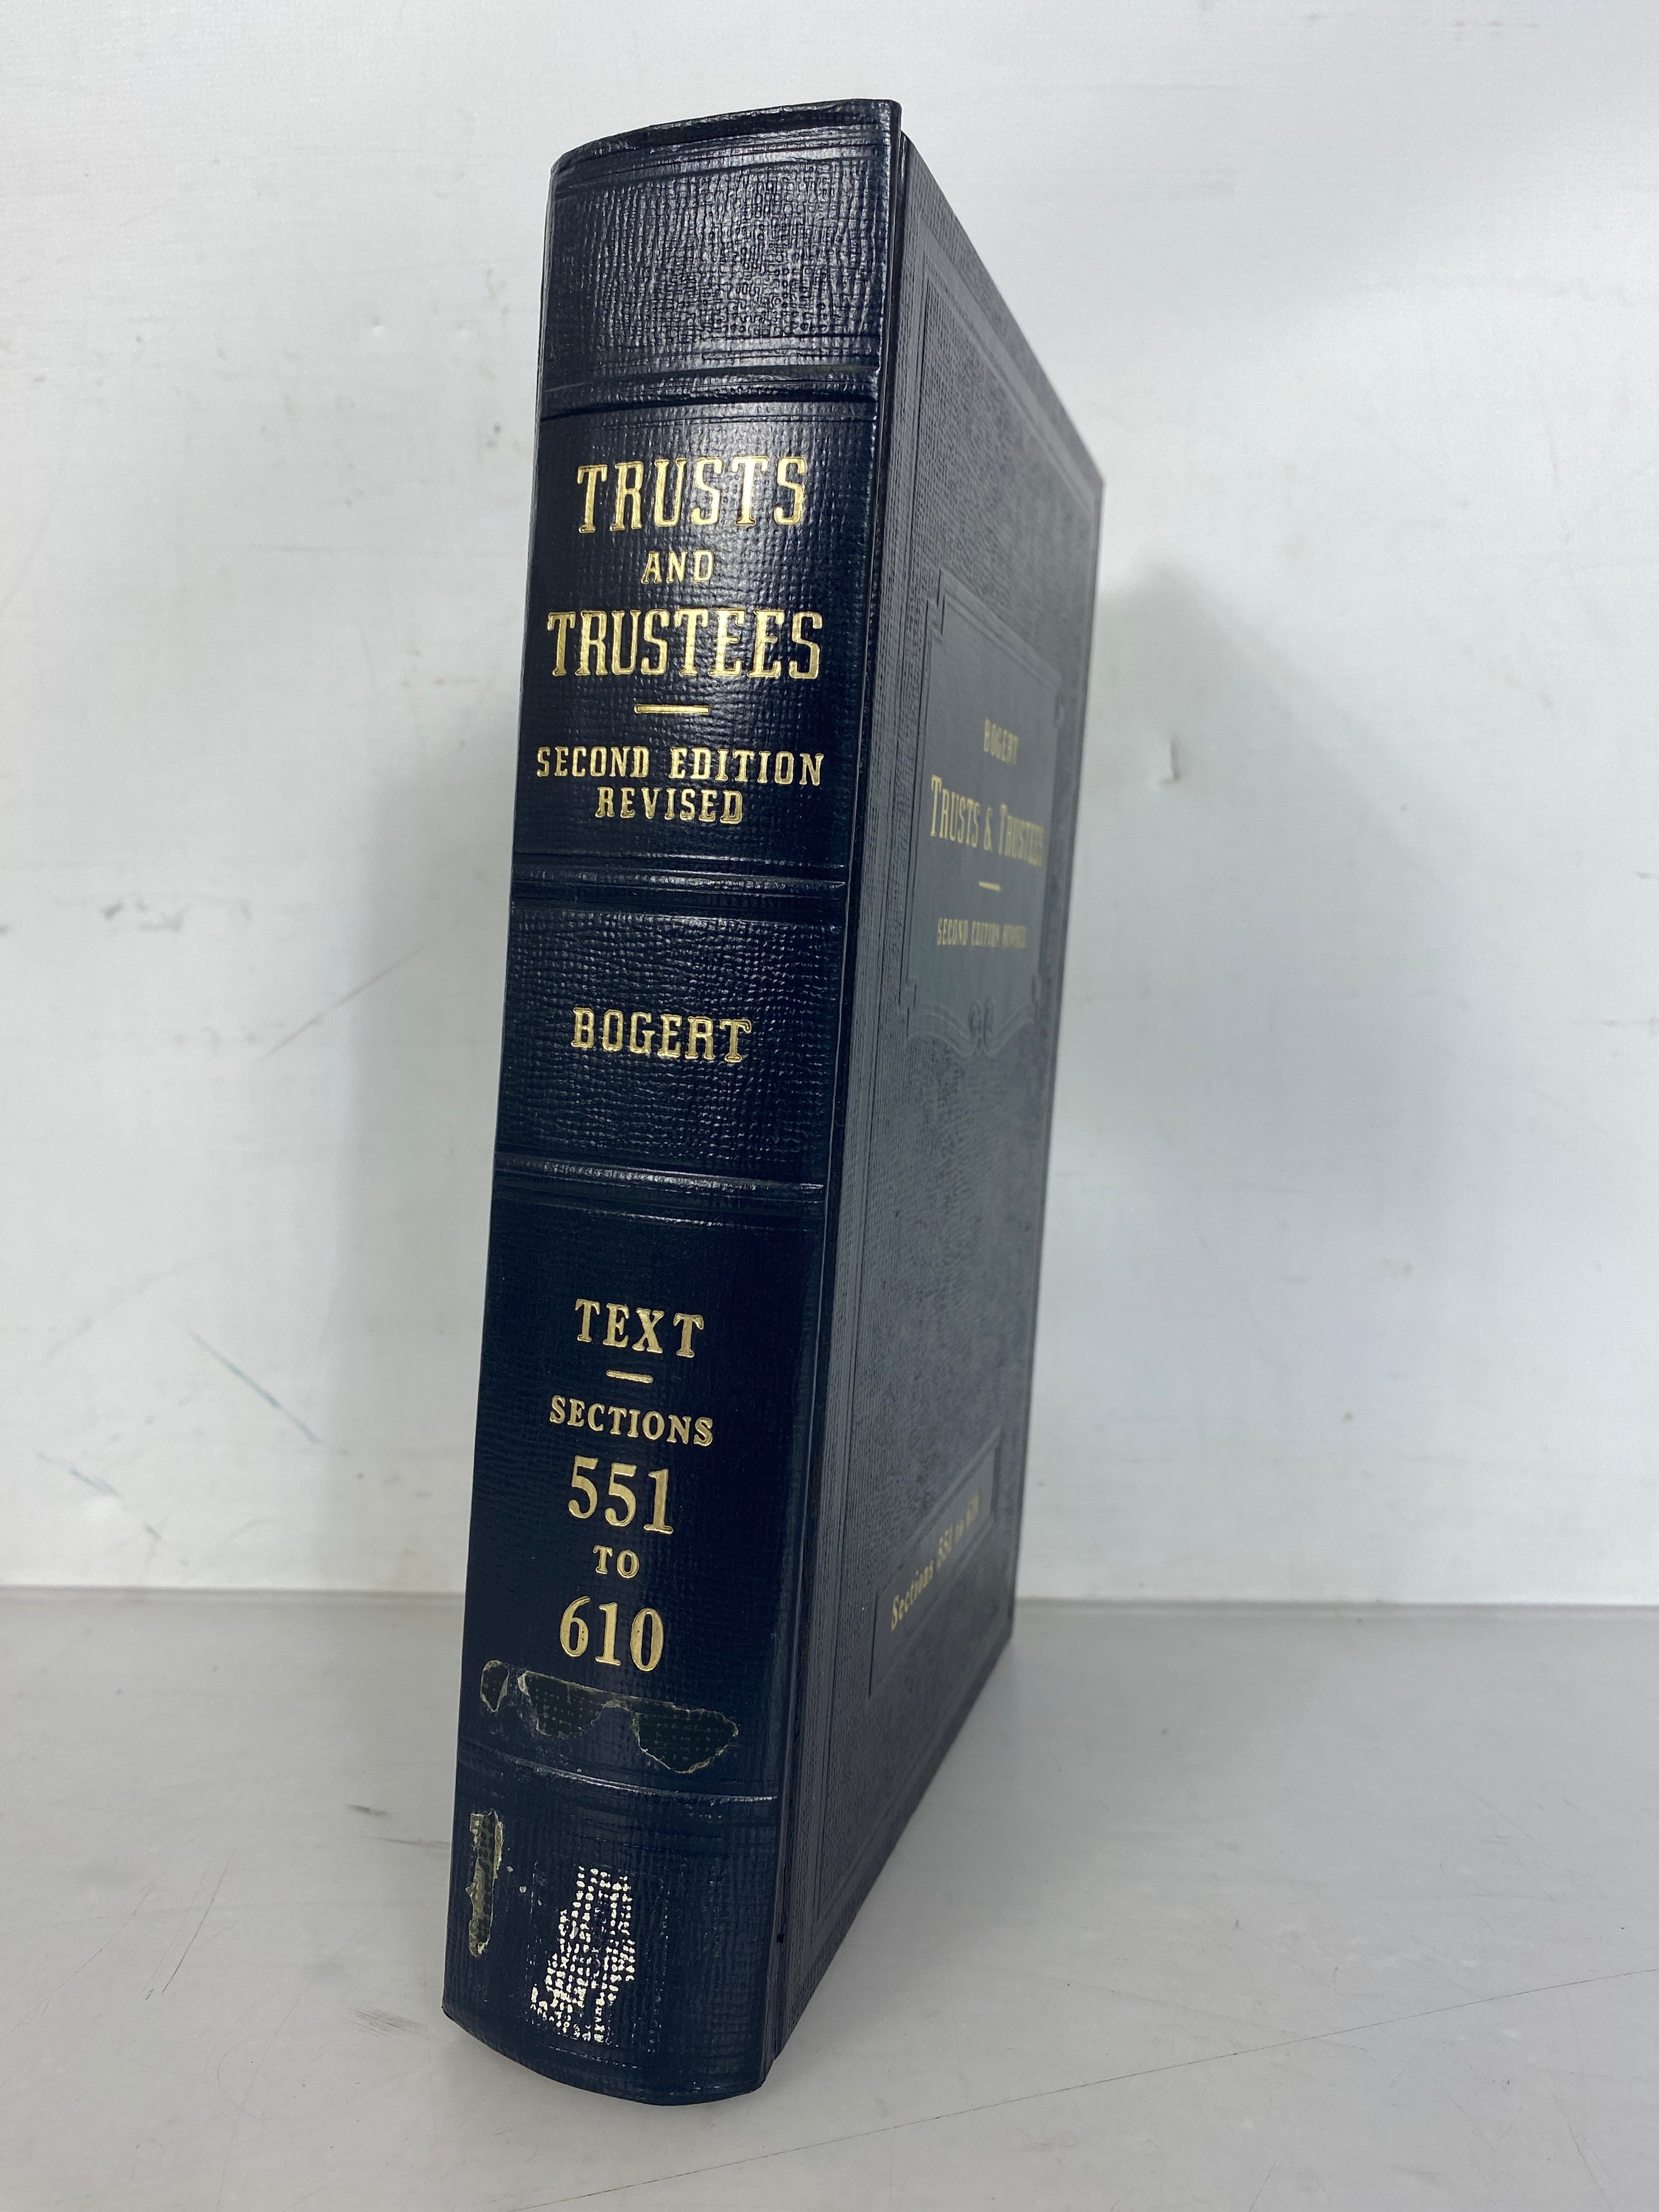 Vintage Law Textbook: Bogert Trusts & Trustees Second Edition Revised (551-610) 1980 HC